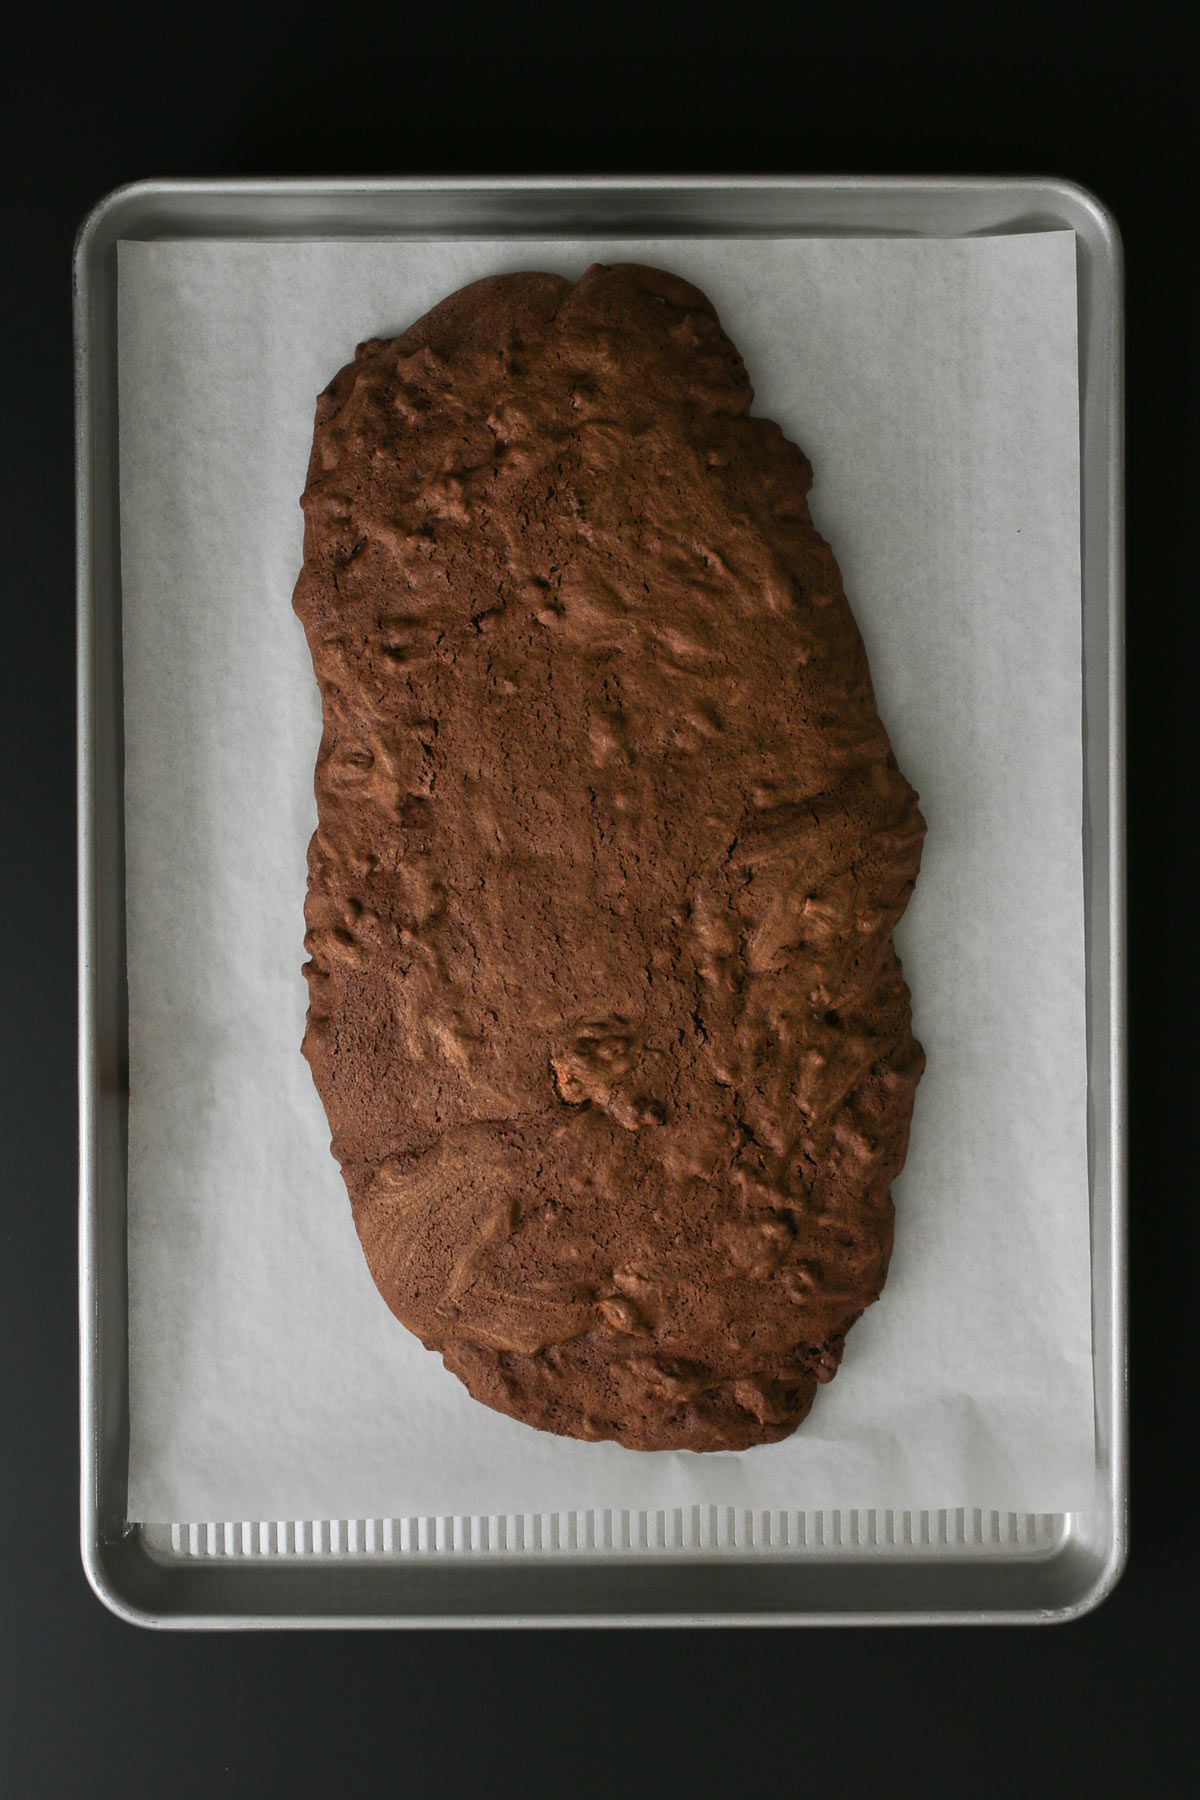 the baked log of chocolate biscotti batter down the center of the parchment paper.